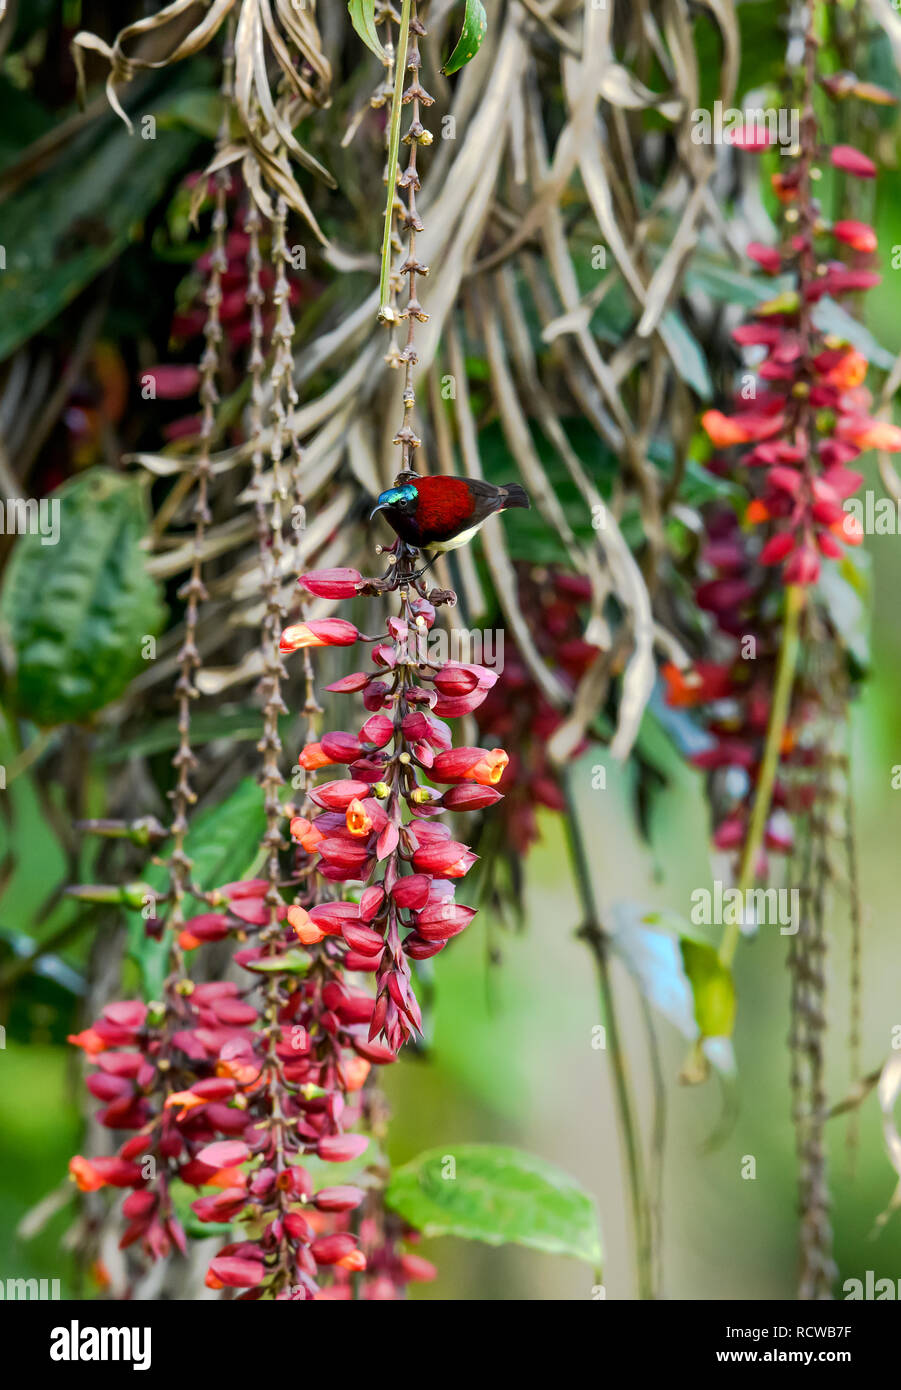 Purple sunbird / Scarlet-backed sunbird from Southeast Asian gardens and woodlands collecting nectar from a ladies shoe flower Thunbergia mysorensis. Stock Photo